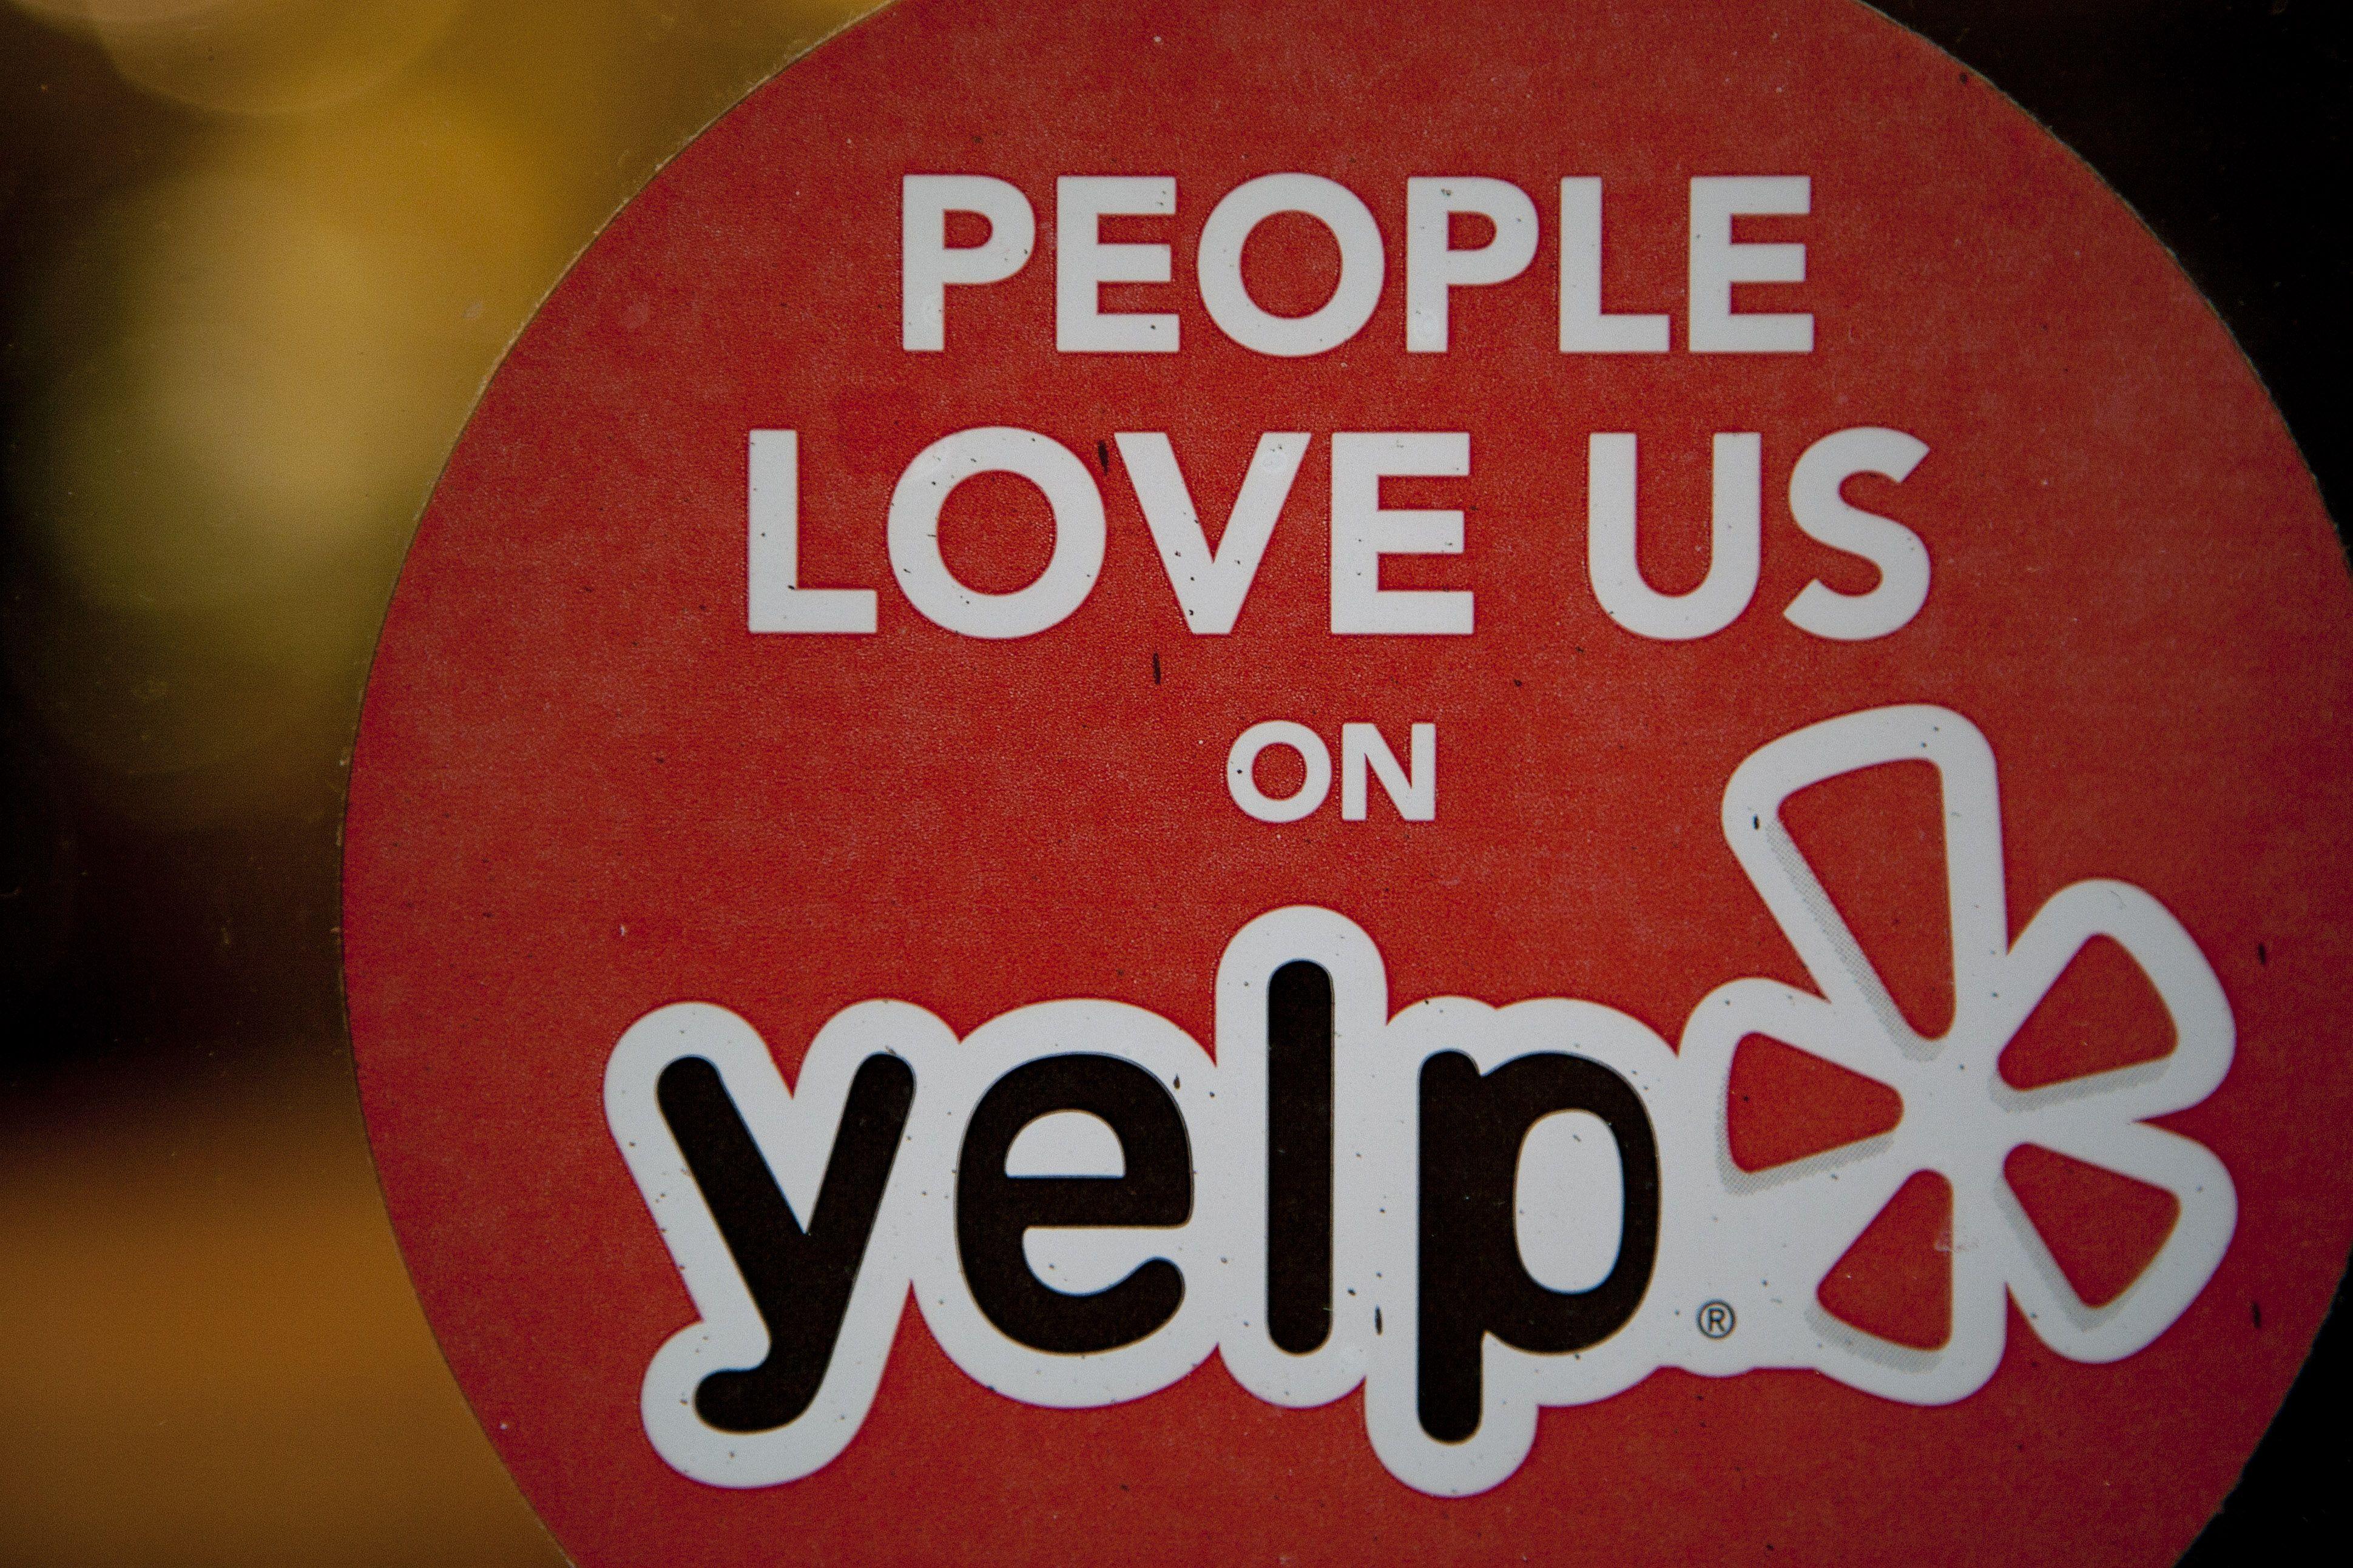 Yelp Review Logo - Yelp Wants You to Review Federal Government Agencies